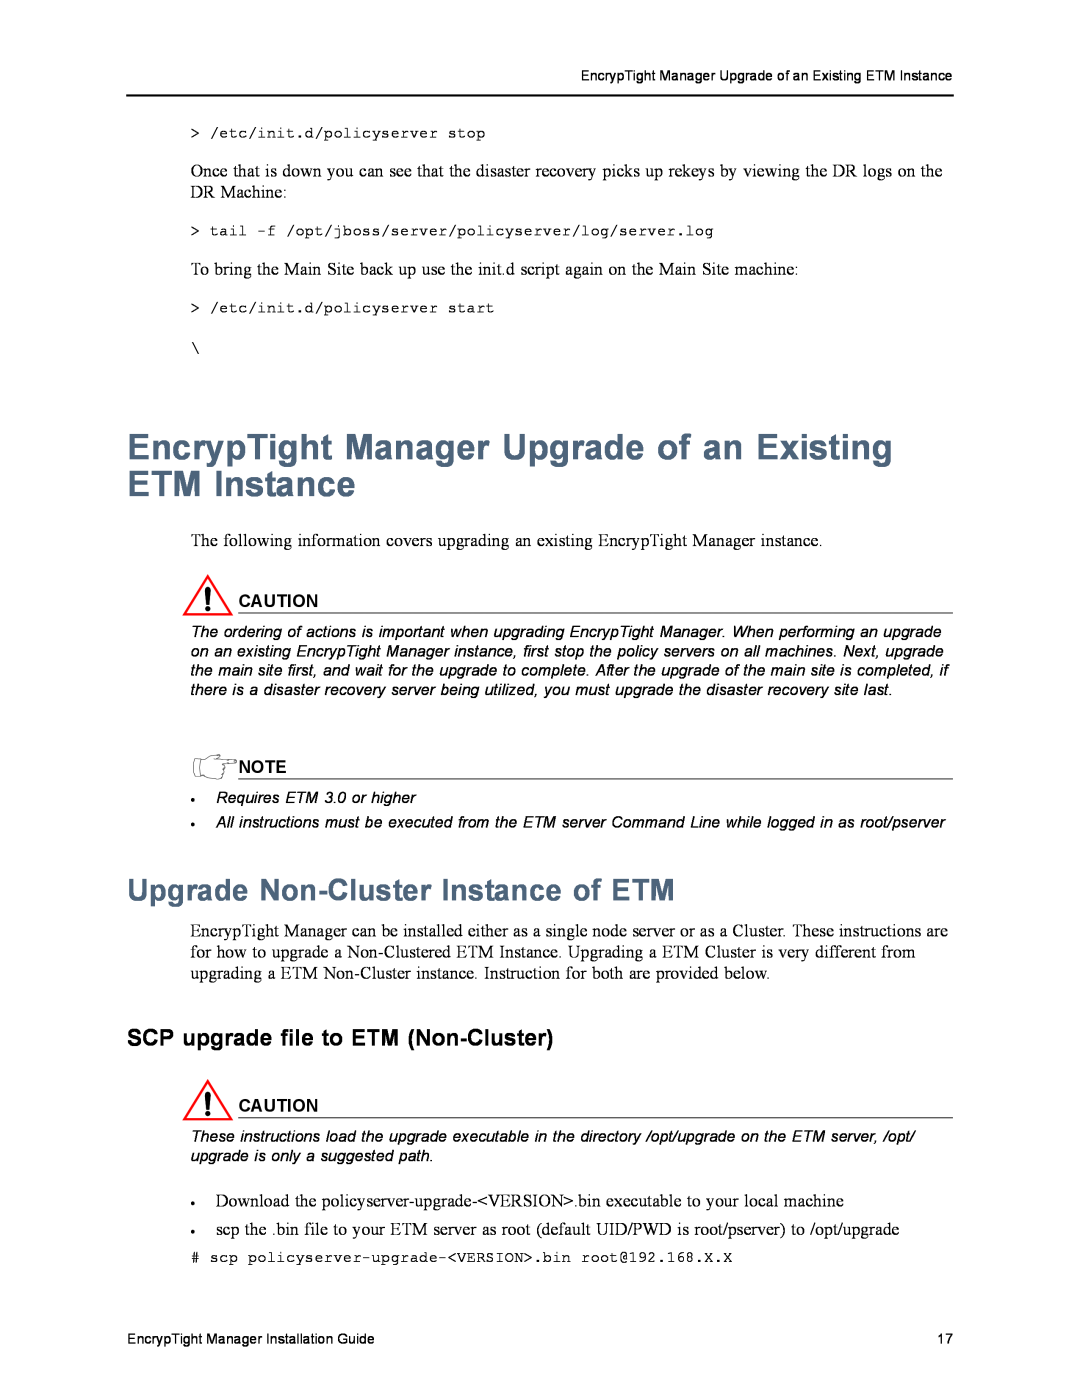 Black Box ET0100A, ET1000A EncrypTight Manager Upgrade of an Existing ETM Instance, Upgrade Non-Cluster Instance of ETM 